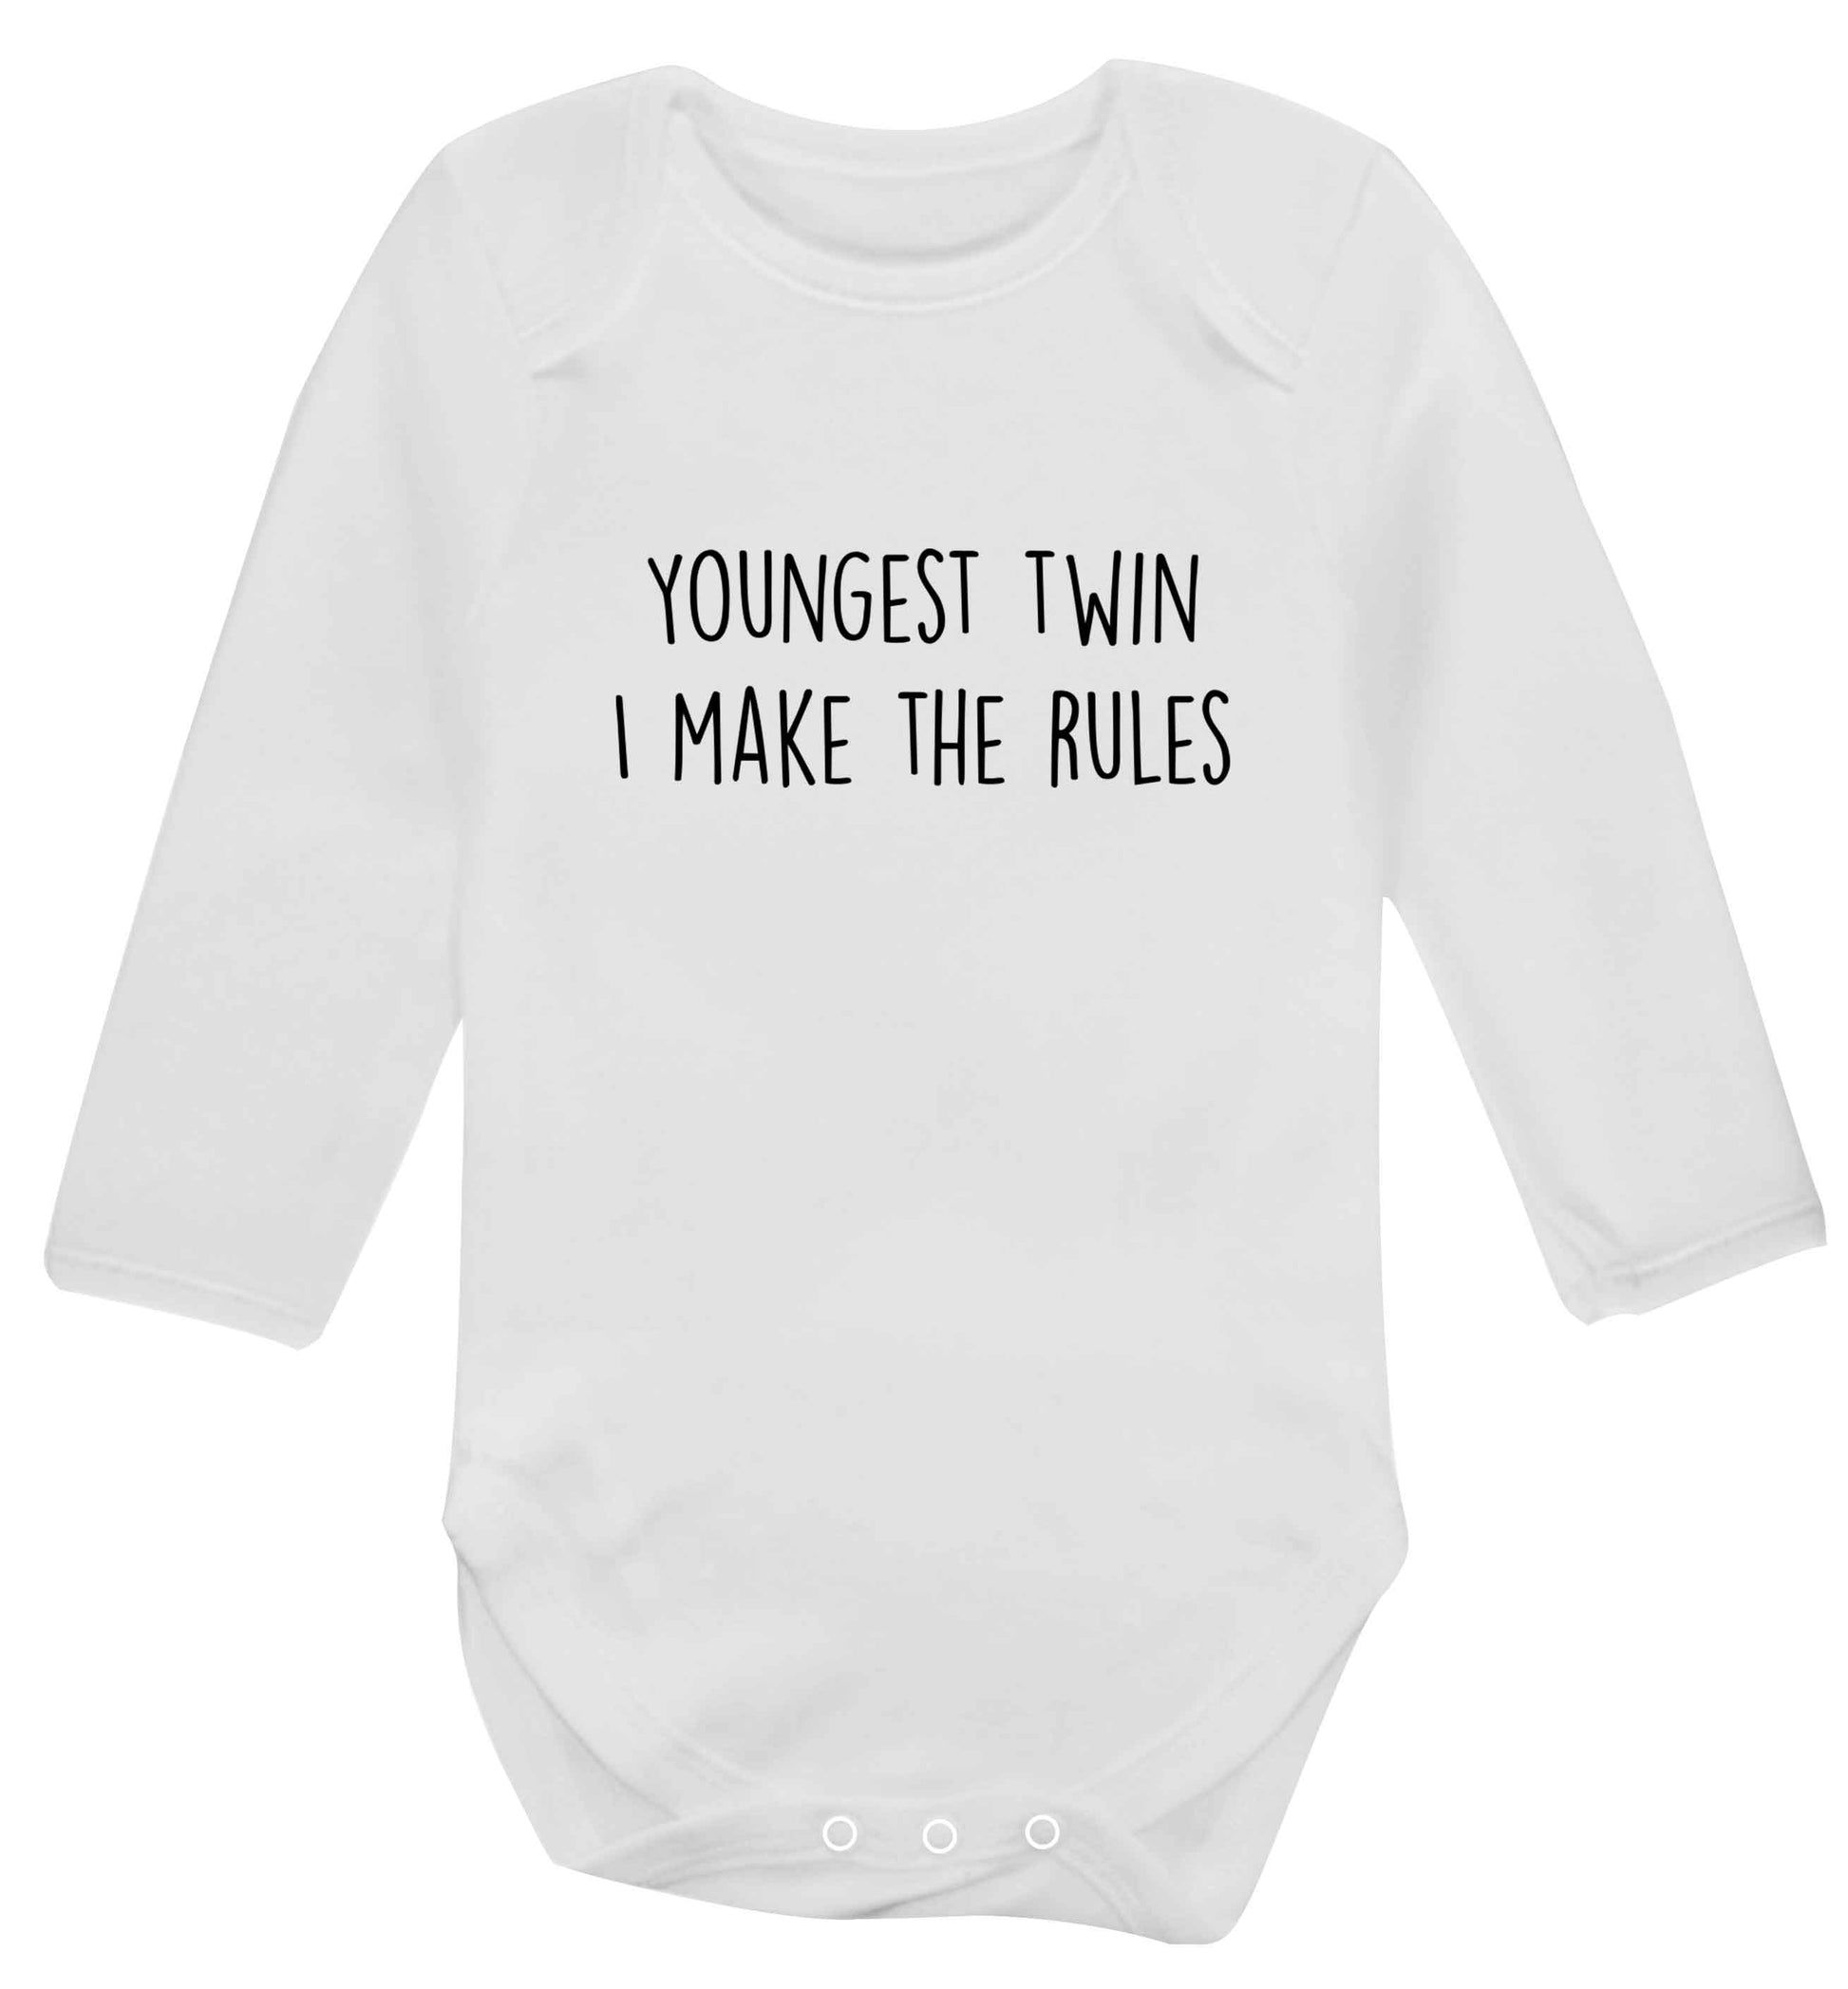 Youngest twin I make the rules baby vest long sleeved white 6-12 months